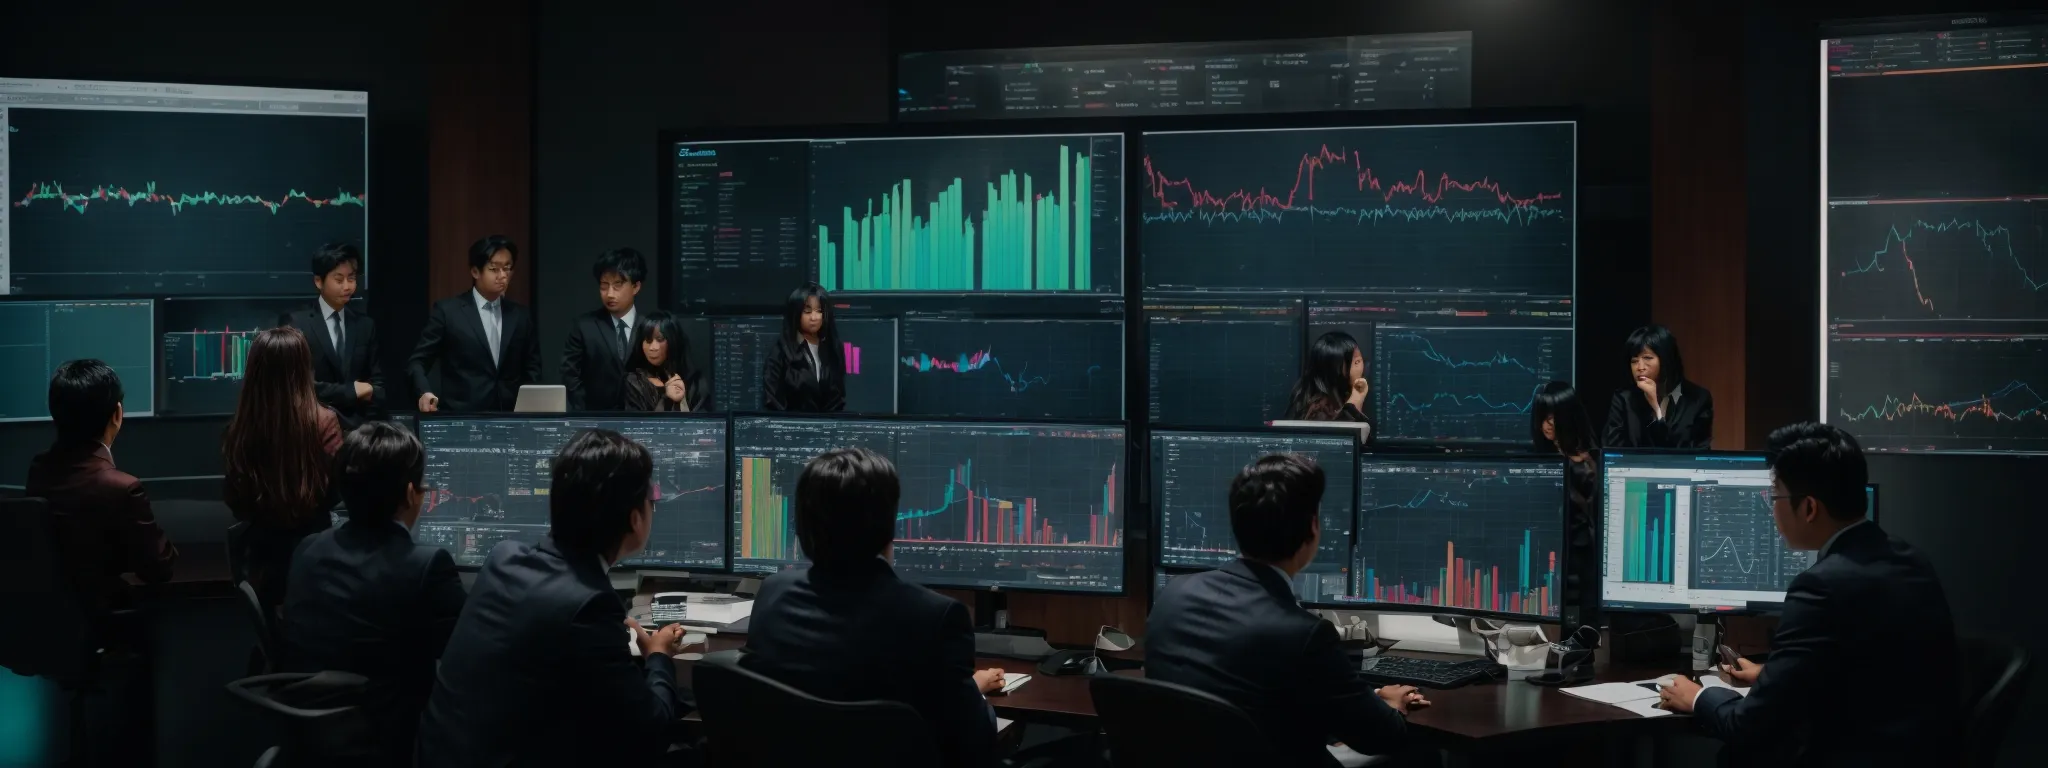 a group of professionals gathered around a large monitor displaying colorful graphs and data analytics dashboards.